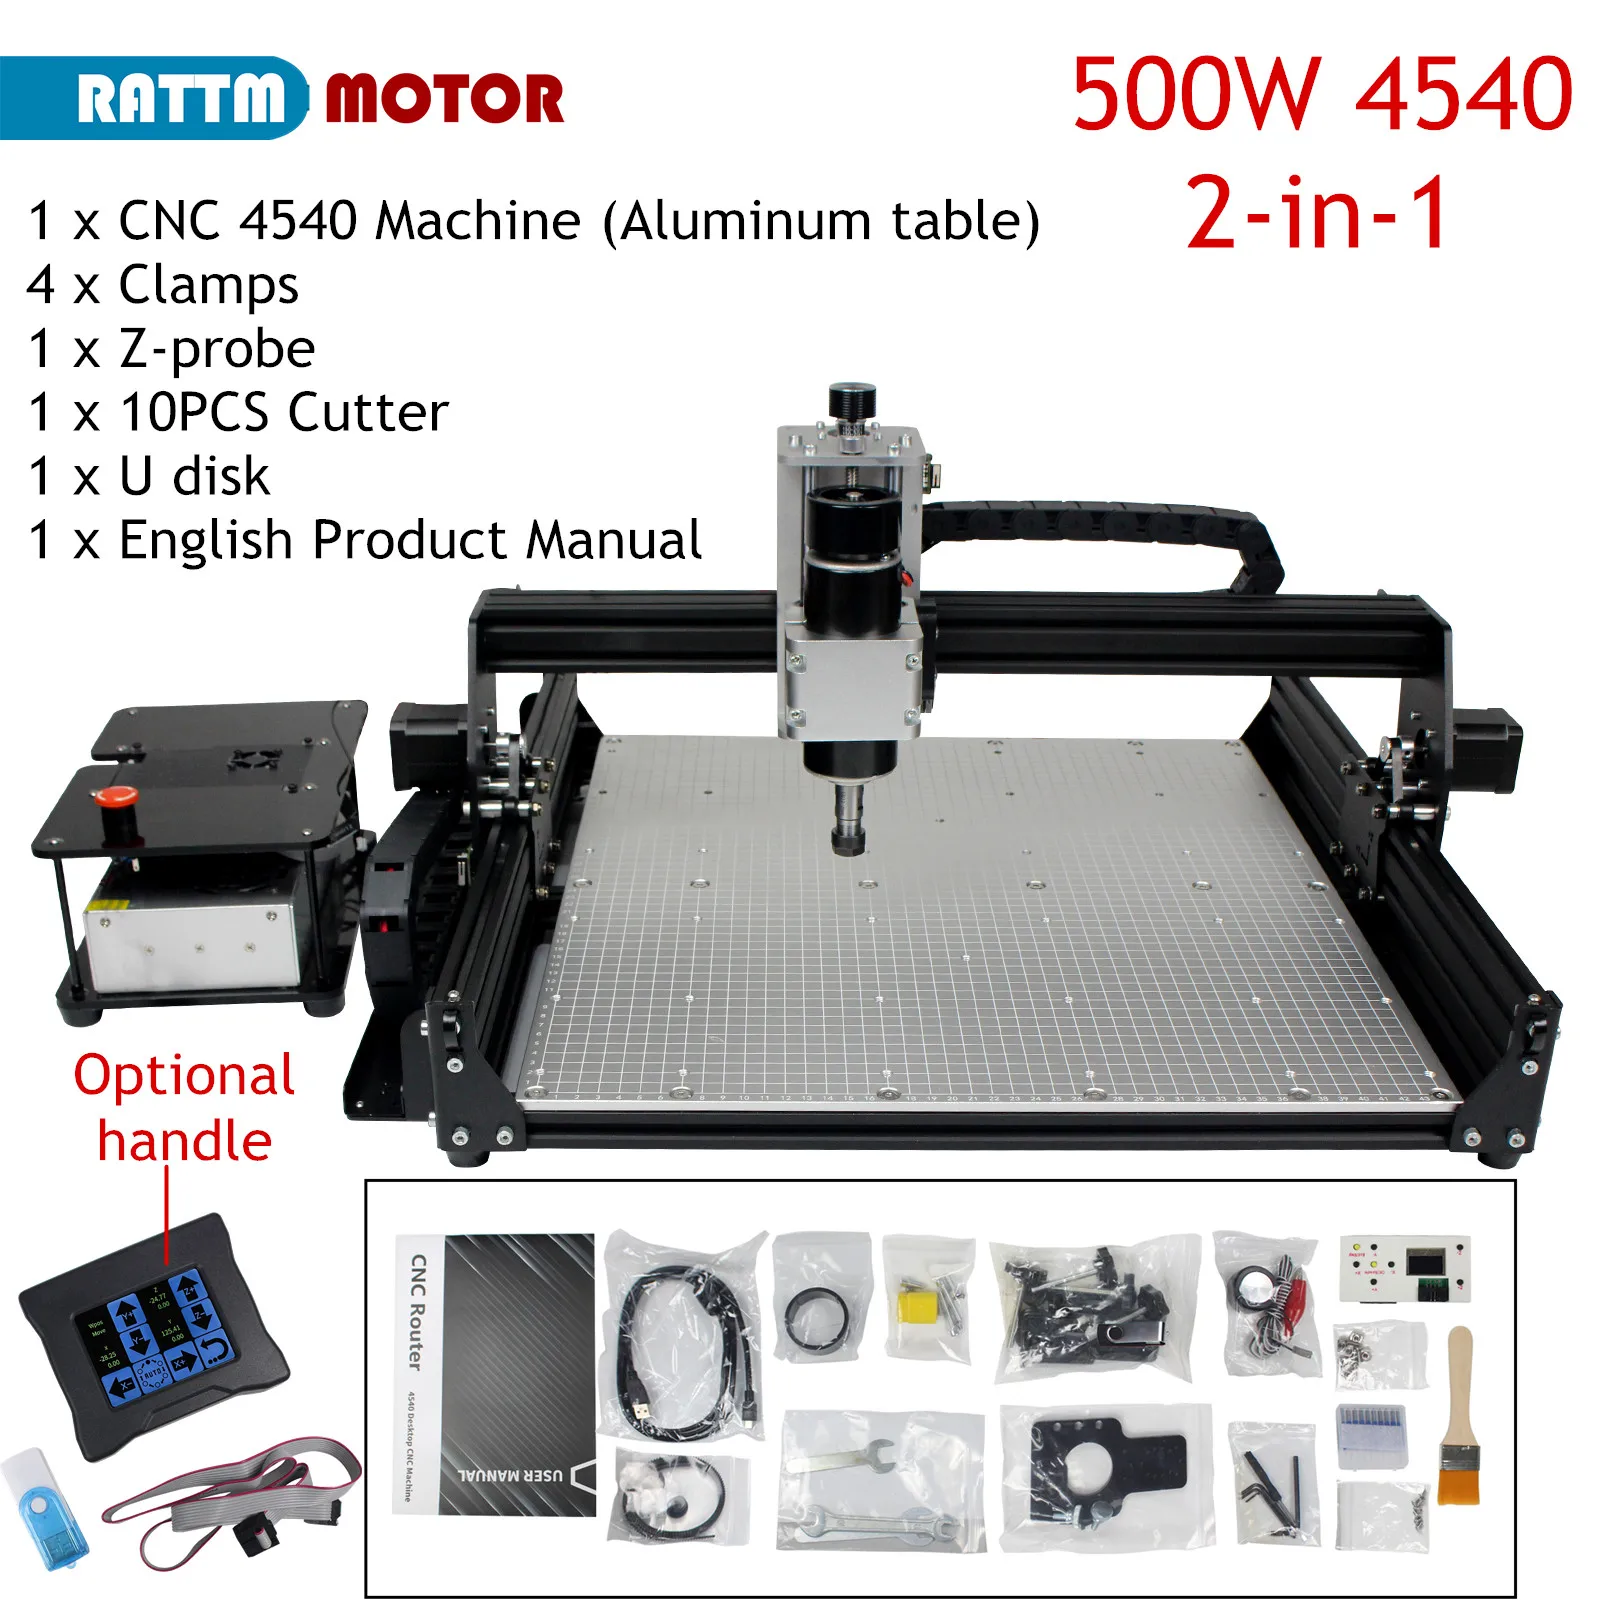 

【2-in-1】500W CNC Spindle 4540 3 Axis Wood Router 20W 40W Laser Engraver PCB Milling Metal Acrylic DIY Drilling Engraving Machine